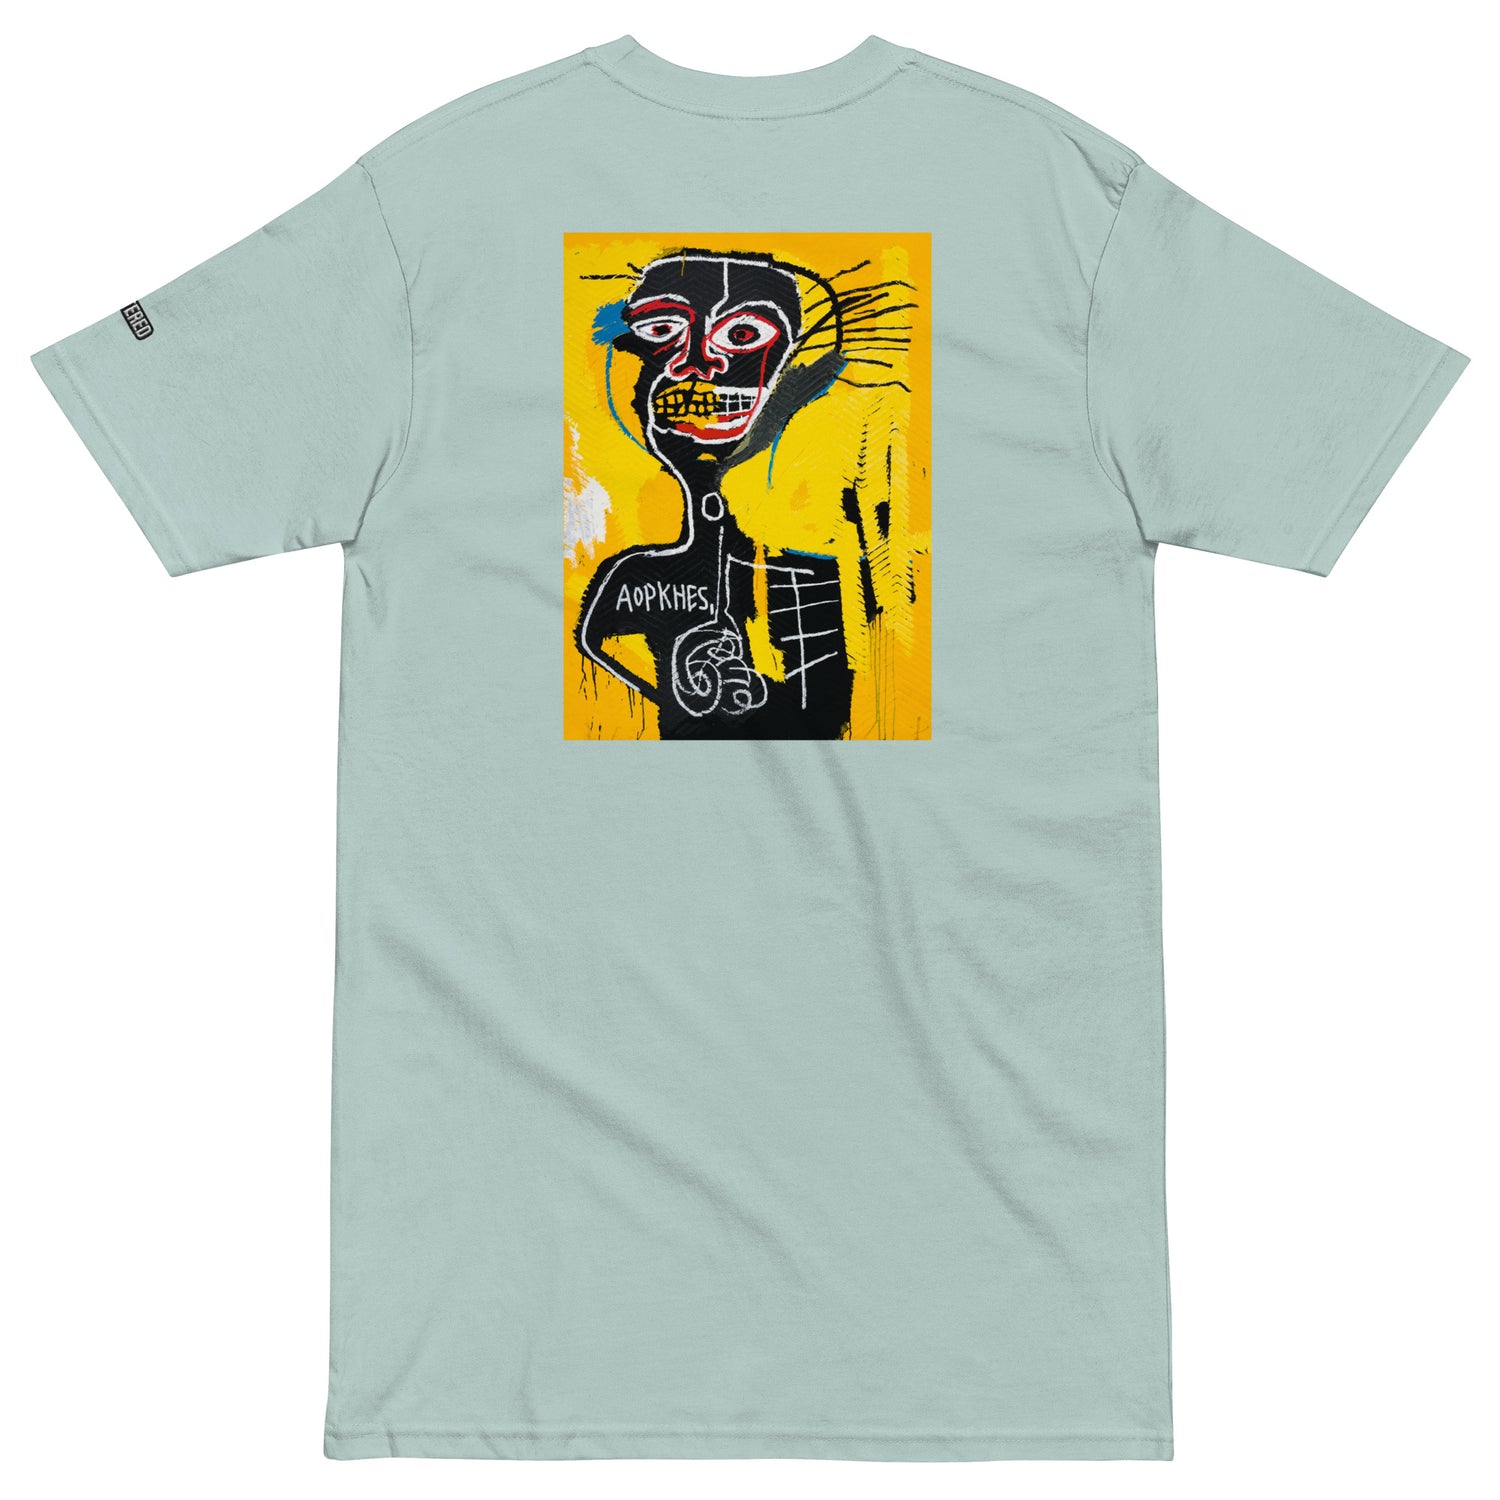 Jean-Michel Basquiat "Cabeza" Artwork Embroidered + Printed Premium Agave Blue Streetwear T-shirt Scattered